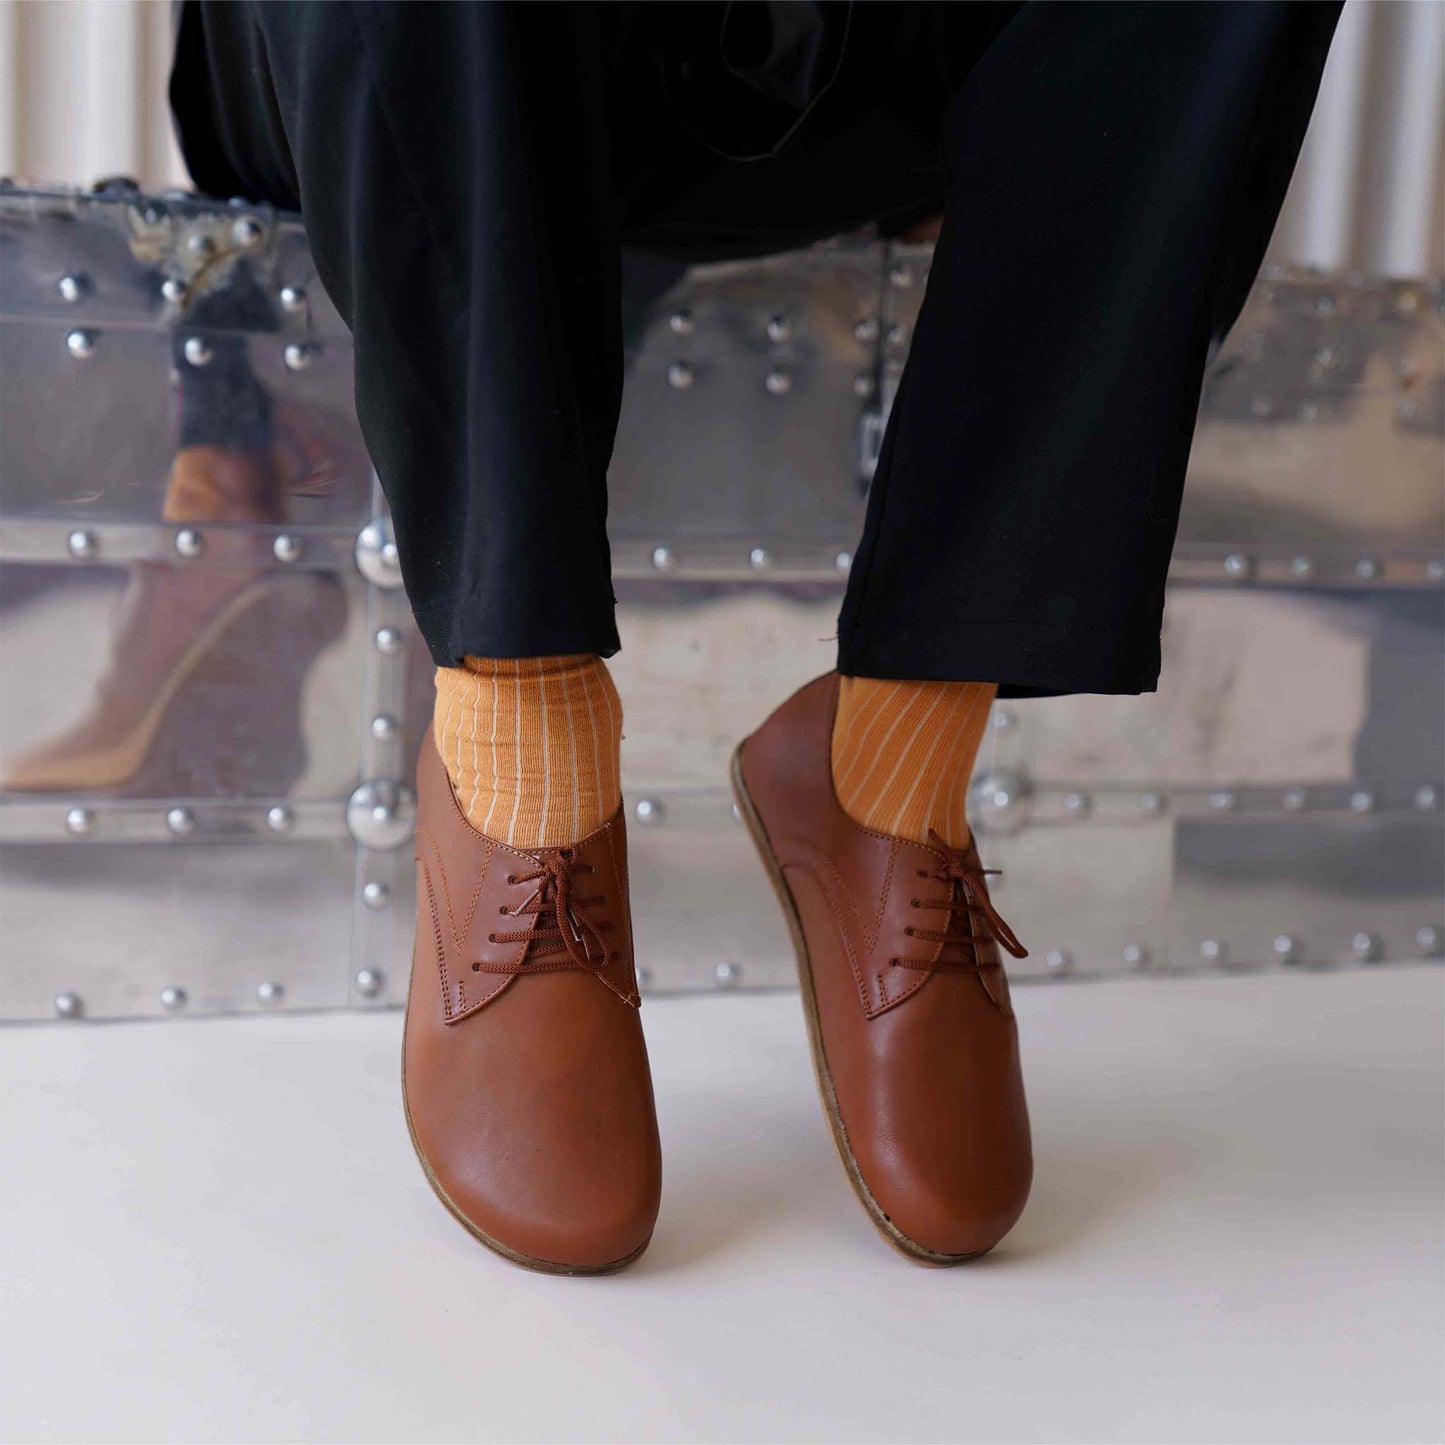 Top-down view of Locris Leather Barefoot Men's Oxfords in tan brown, paired with orange socks, emphasizing their unique style.